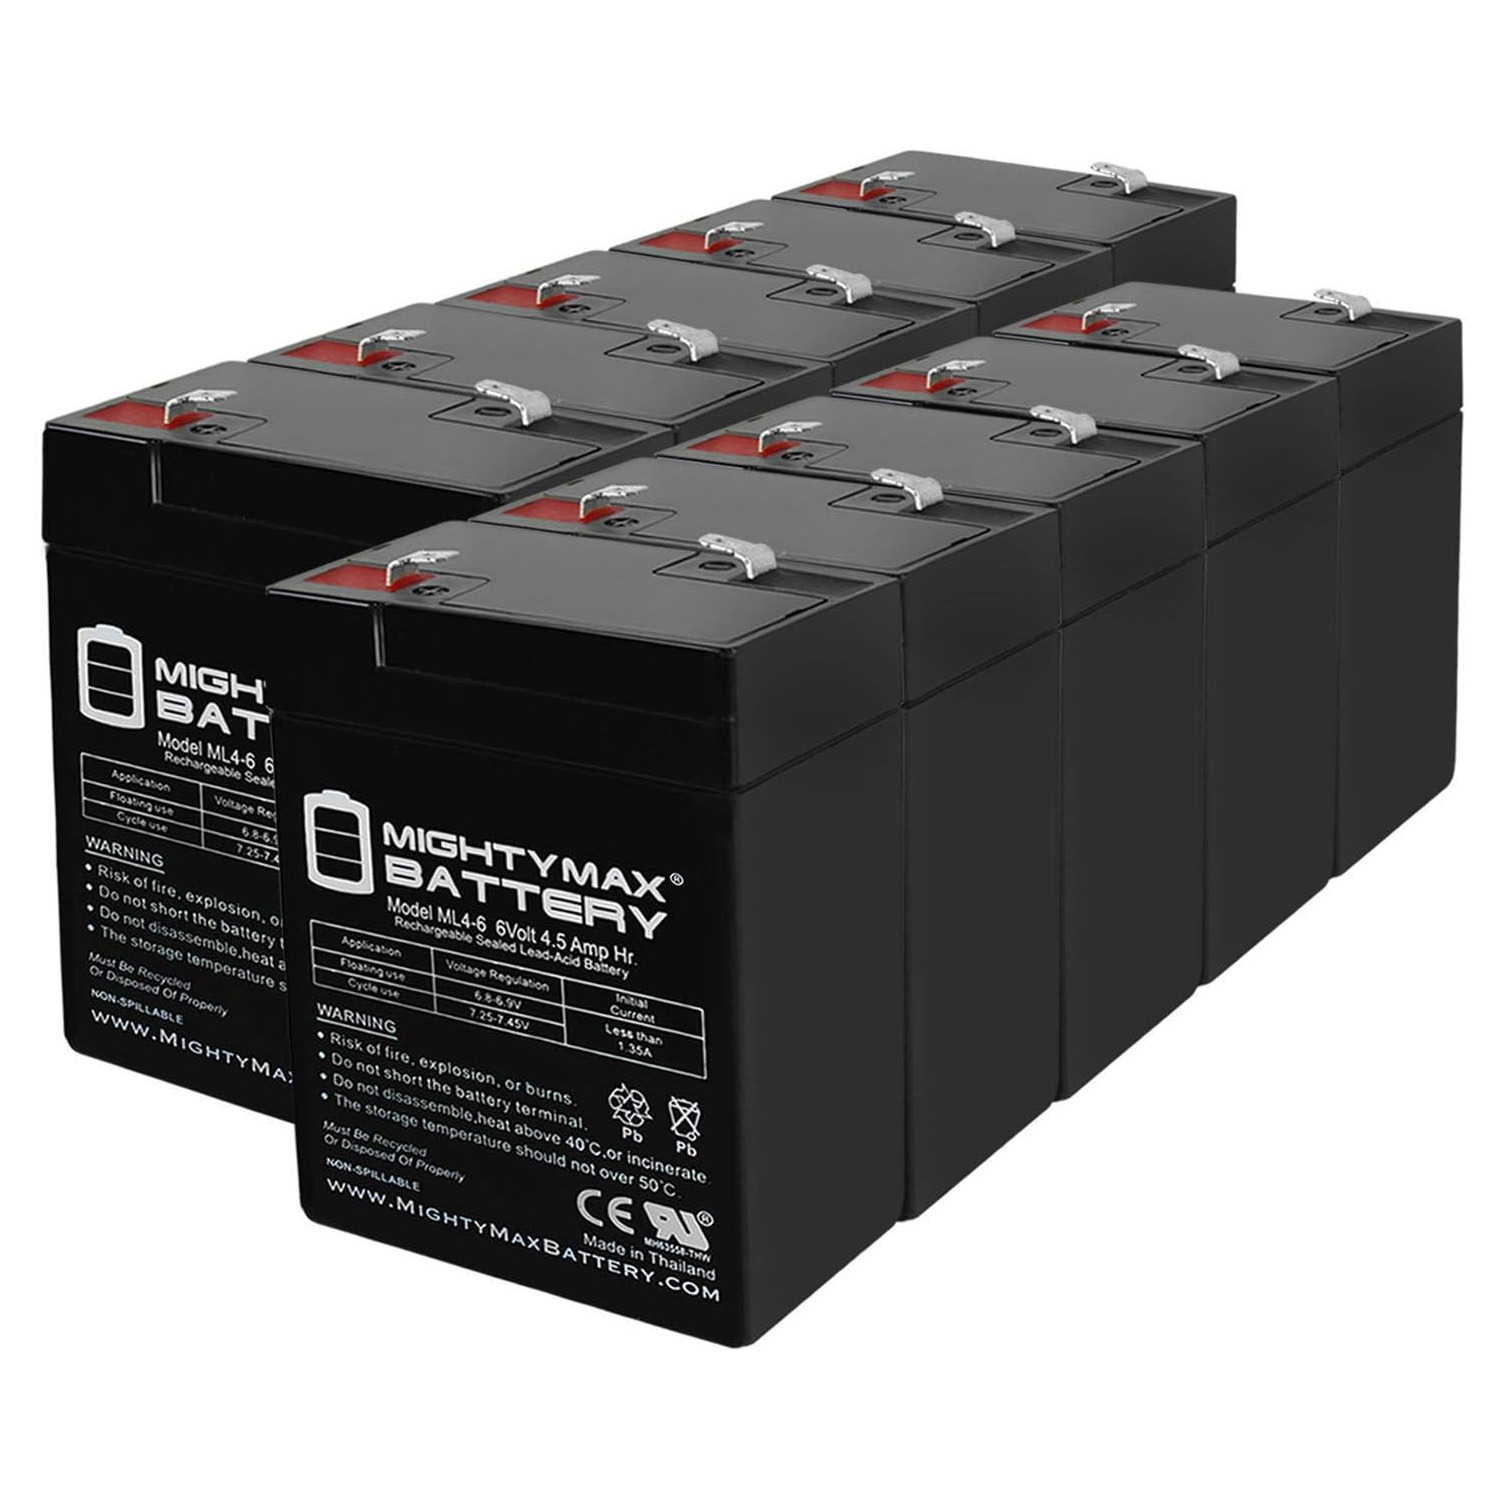  ML4-6 - 6V 4.5AH SLA Replacement Battery Compatible with Streamlight Vulcan, 44007 Sho-me - 10 Pack